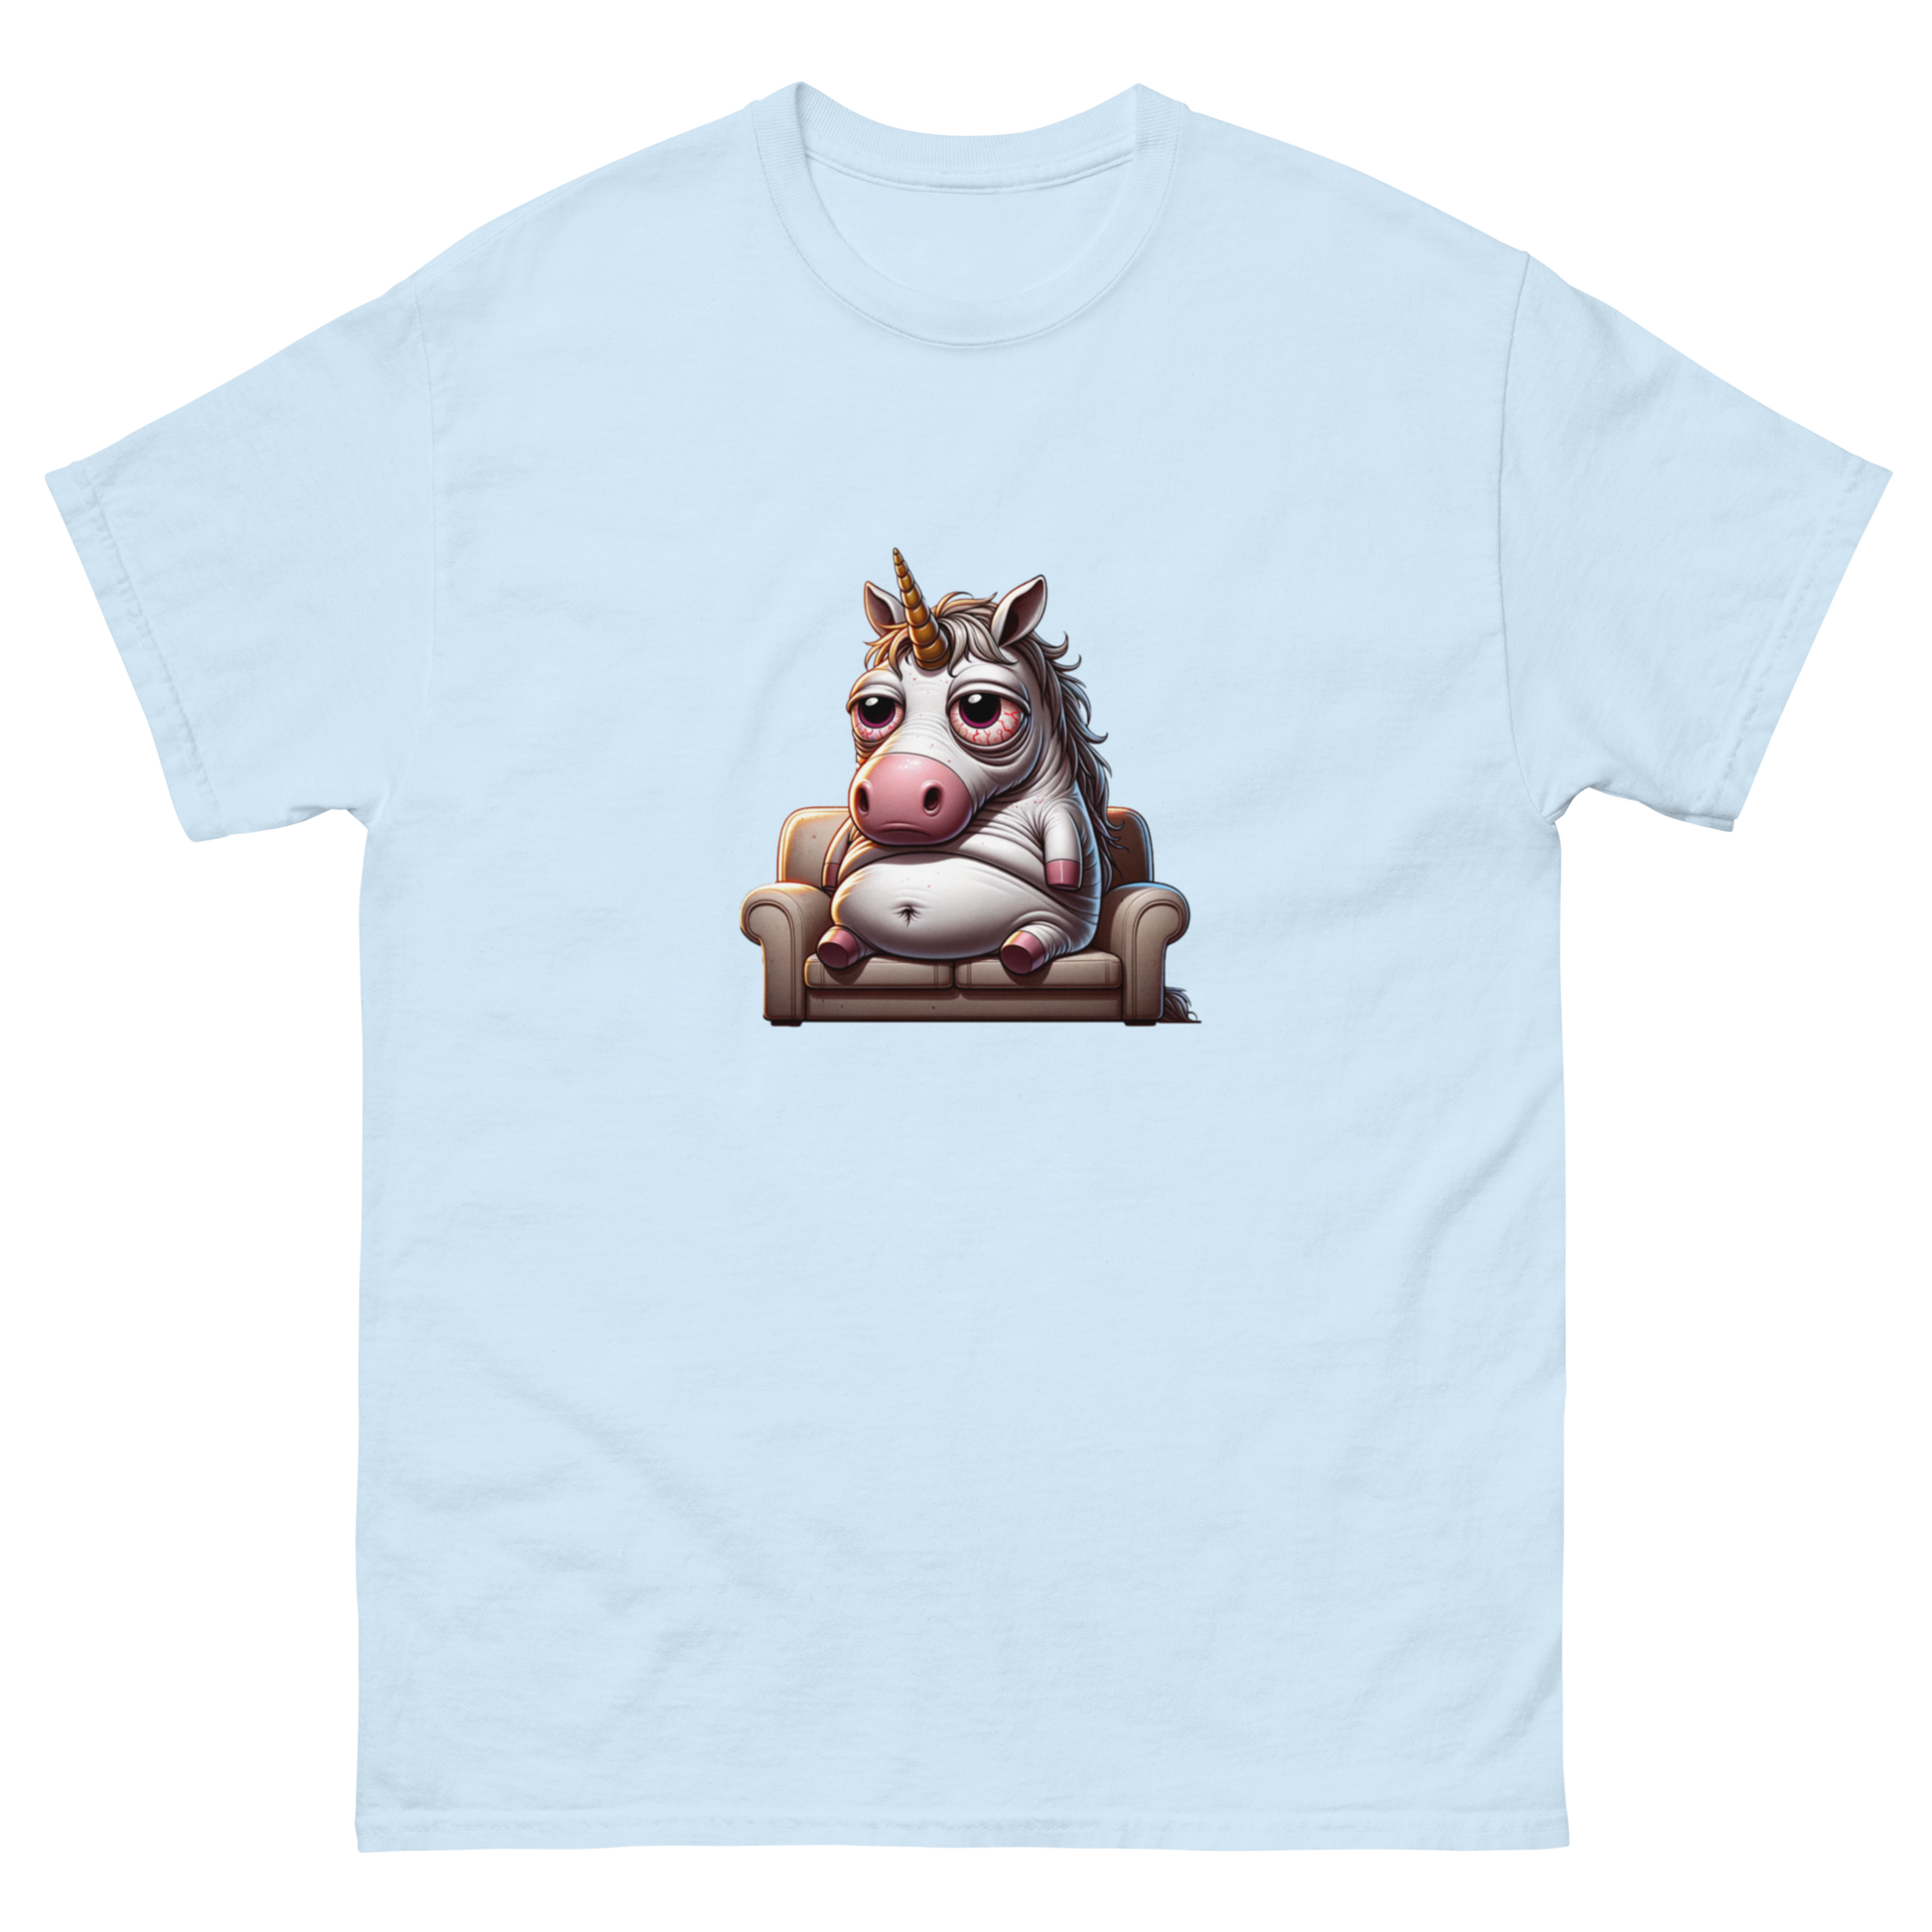 Humorous t-shirt with a cartoon illustration of a laid-back, overweight unicorn lounging on a couch, looking relaxed with bloodshot eyes, capturing a whimsical and slightly rebellious vibe. Perfect for adding a touch of humor and fantasy to your wardrobe